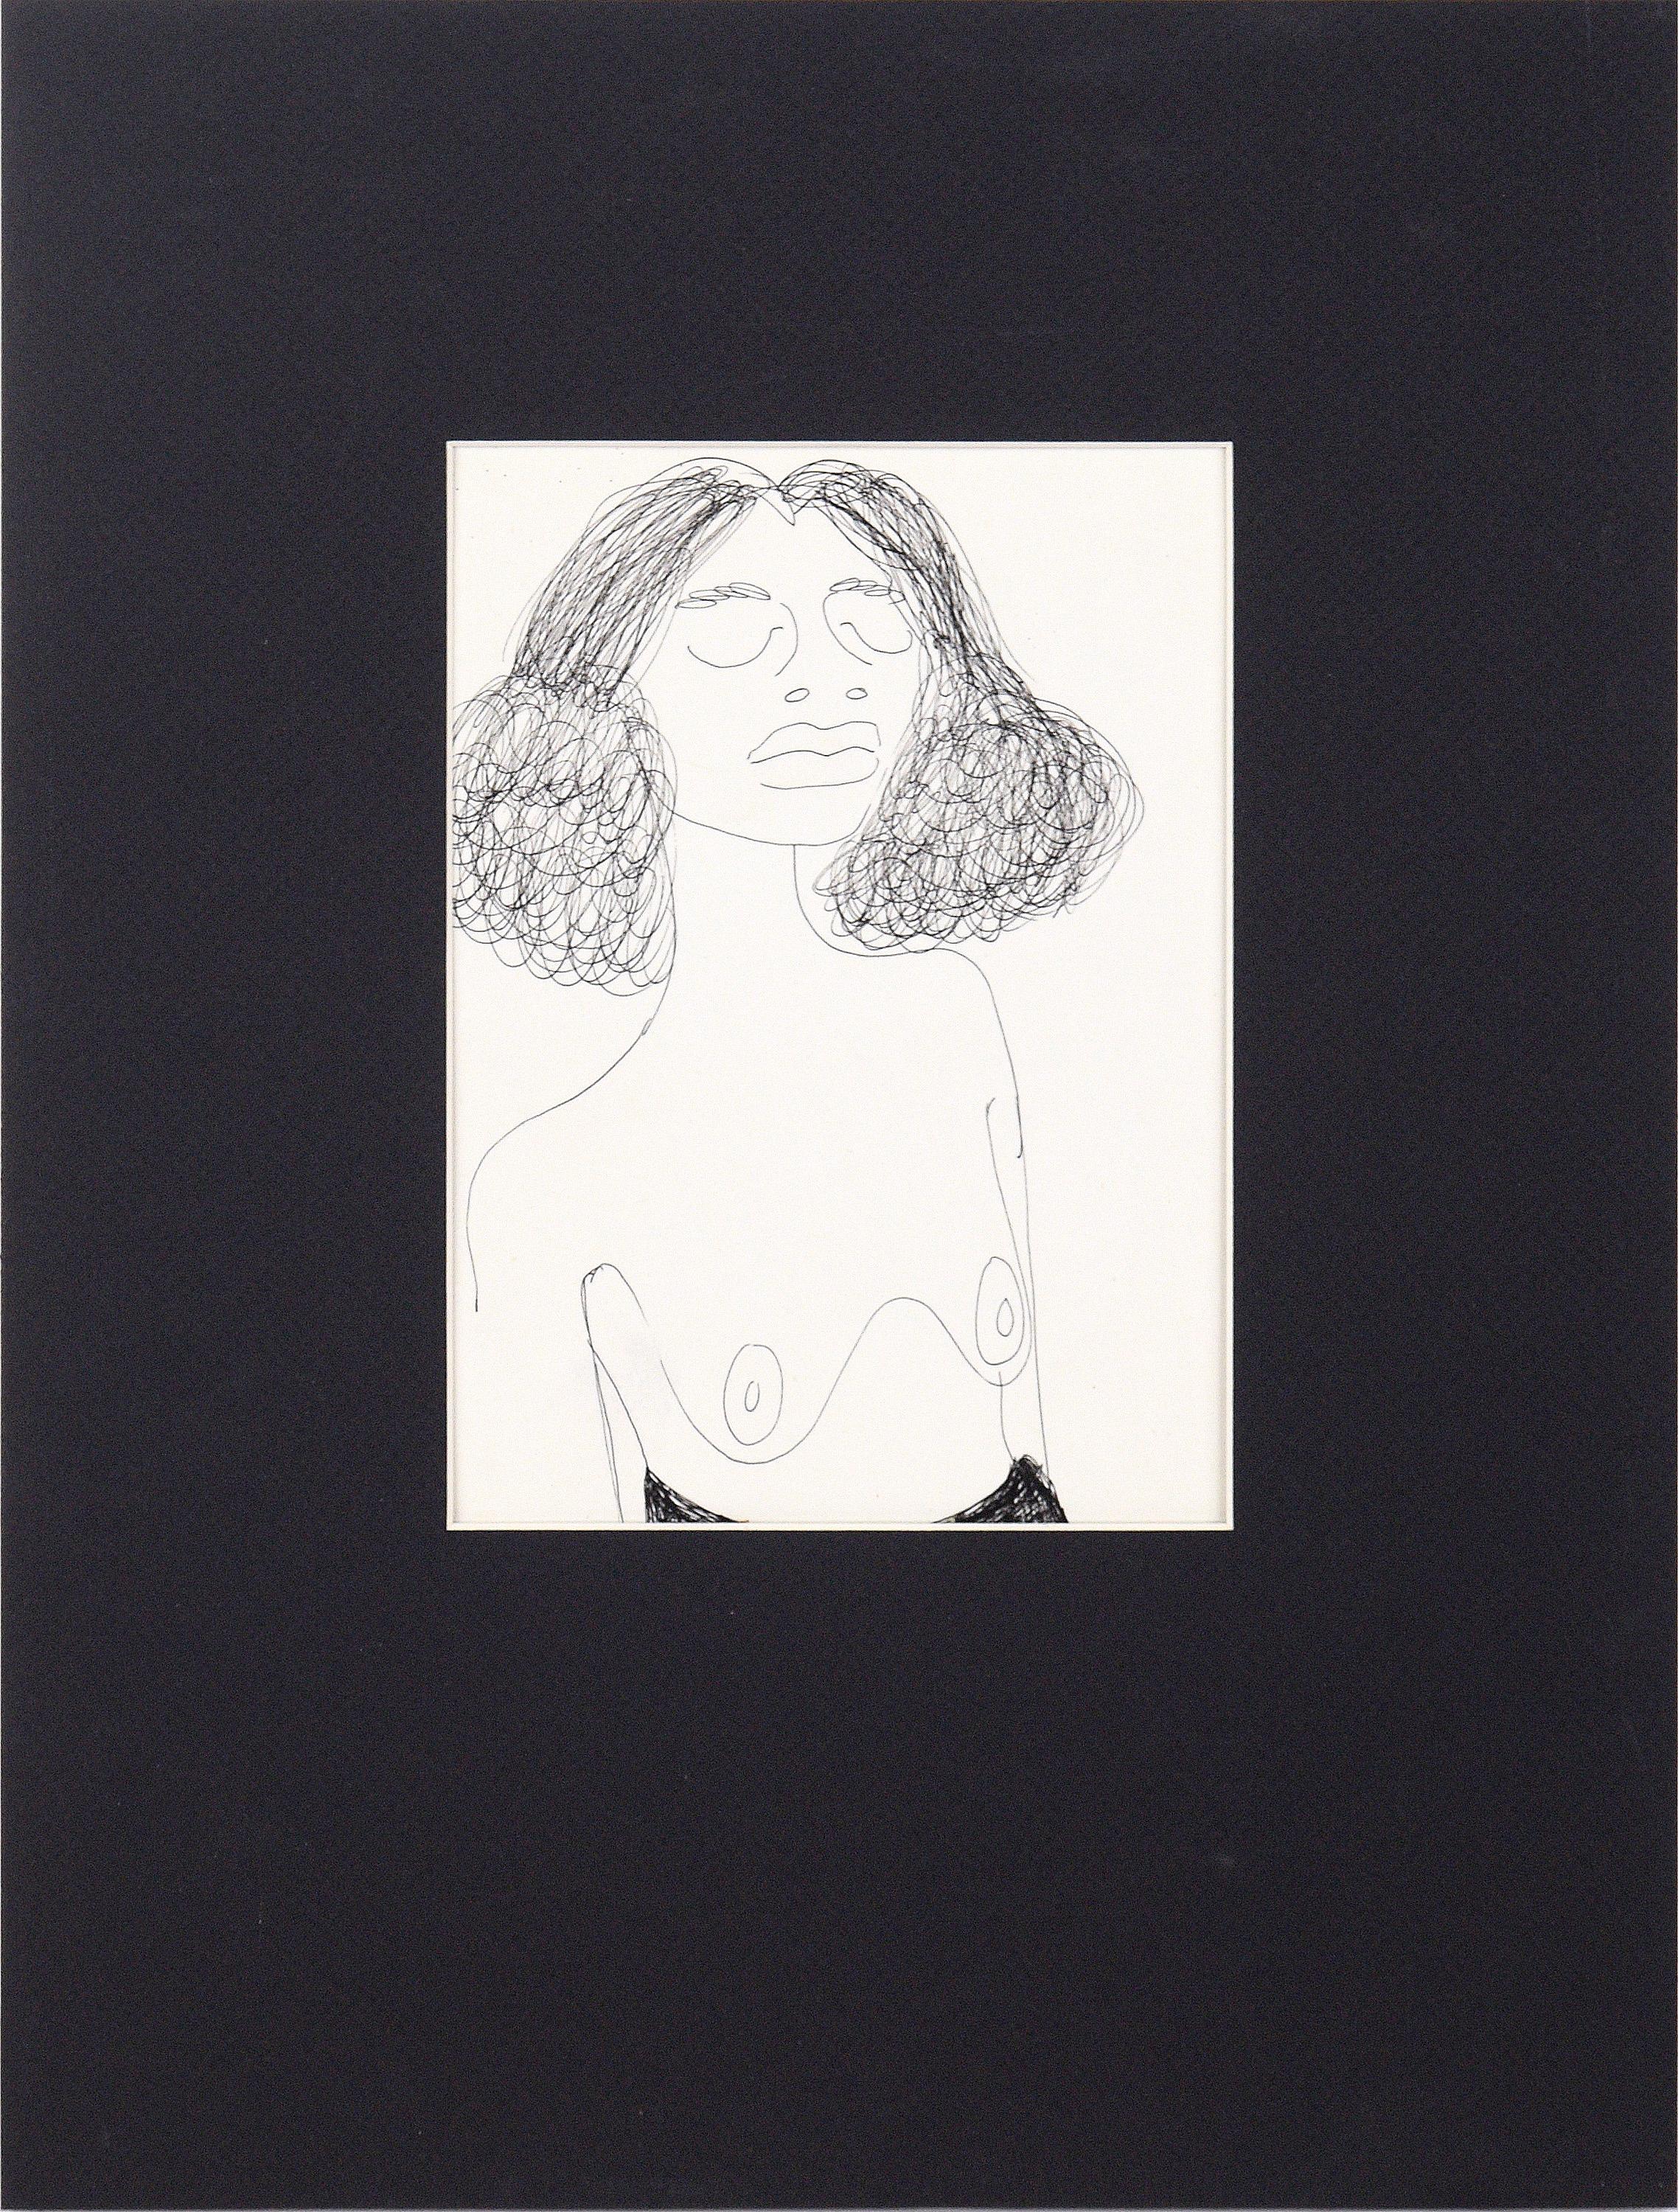 Unknown Figurative Art - Nude Portrait of a Woman with Curly Hair - Drawing in Pen on Paper Signed "Ting"